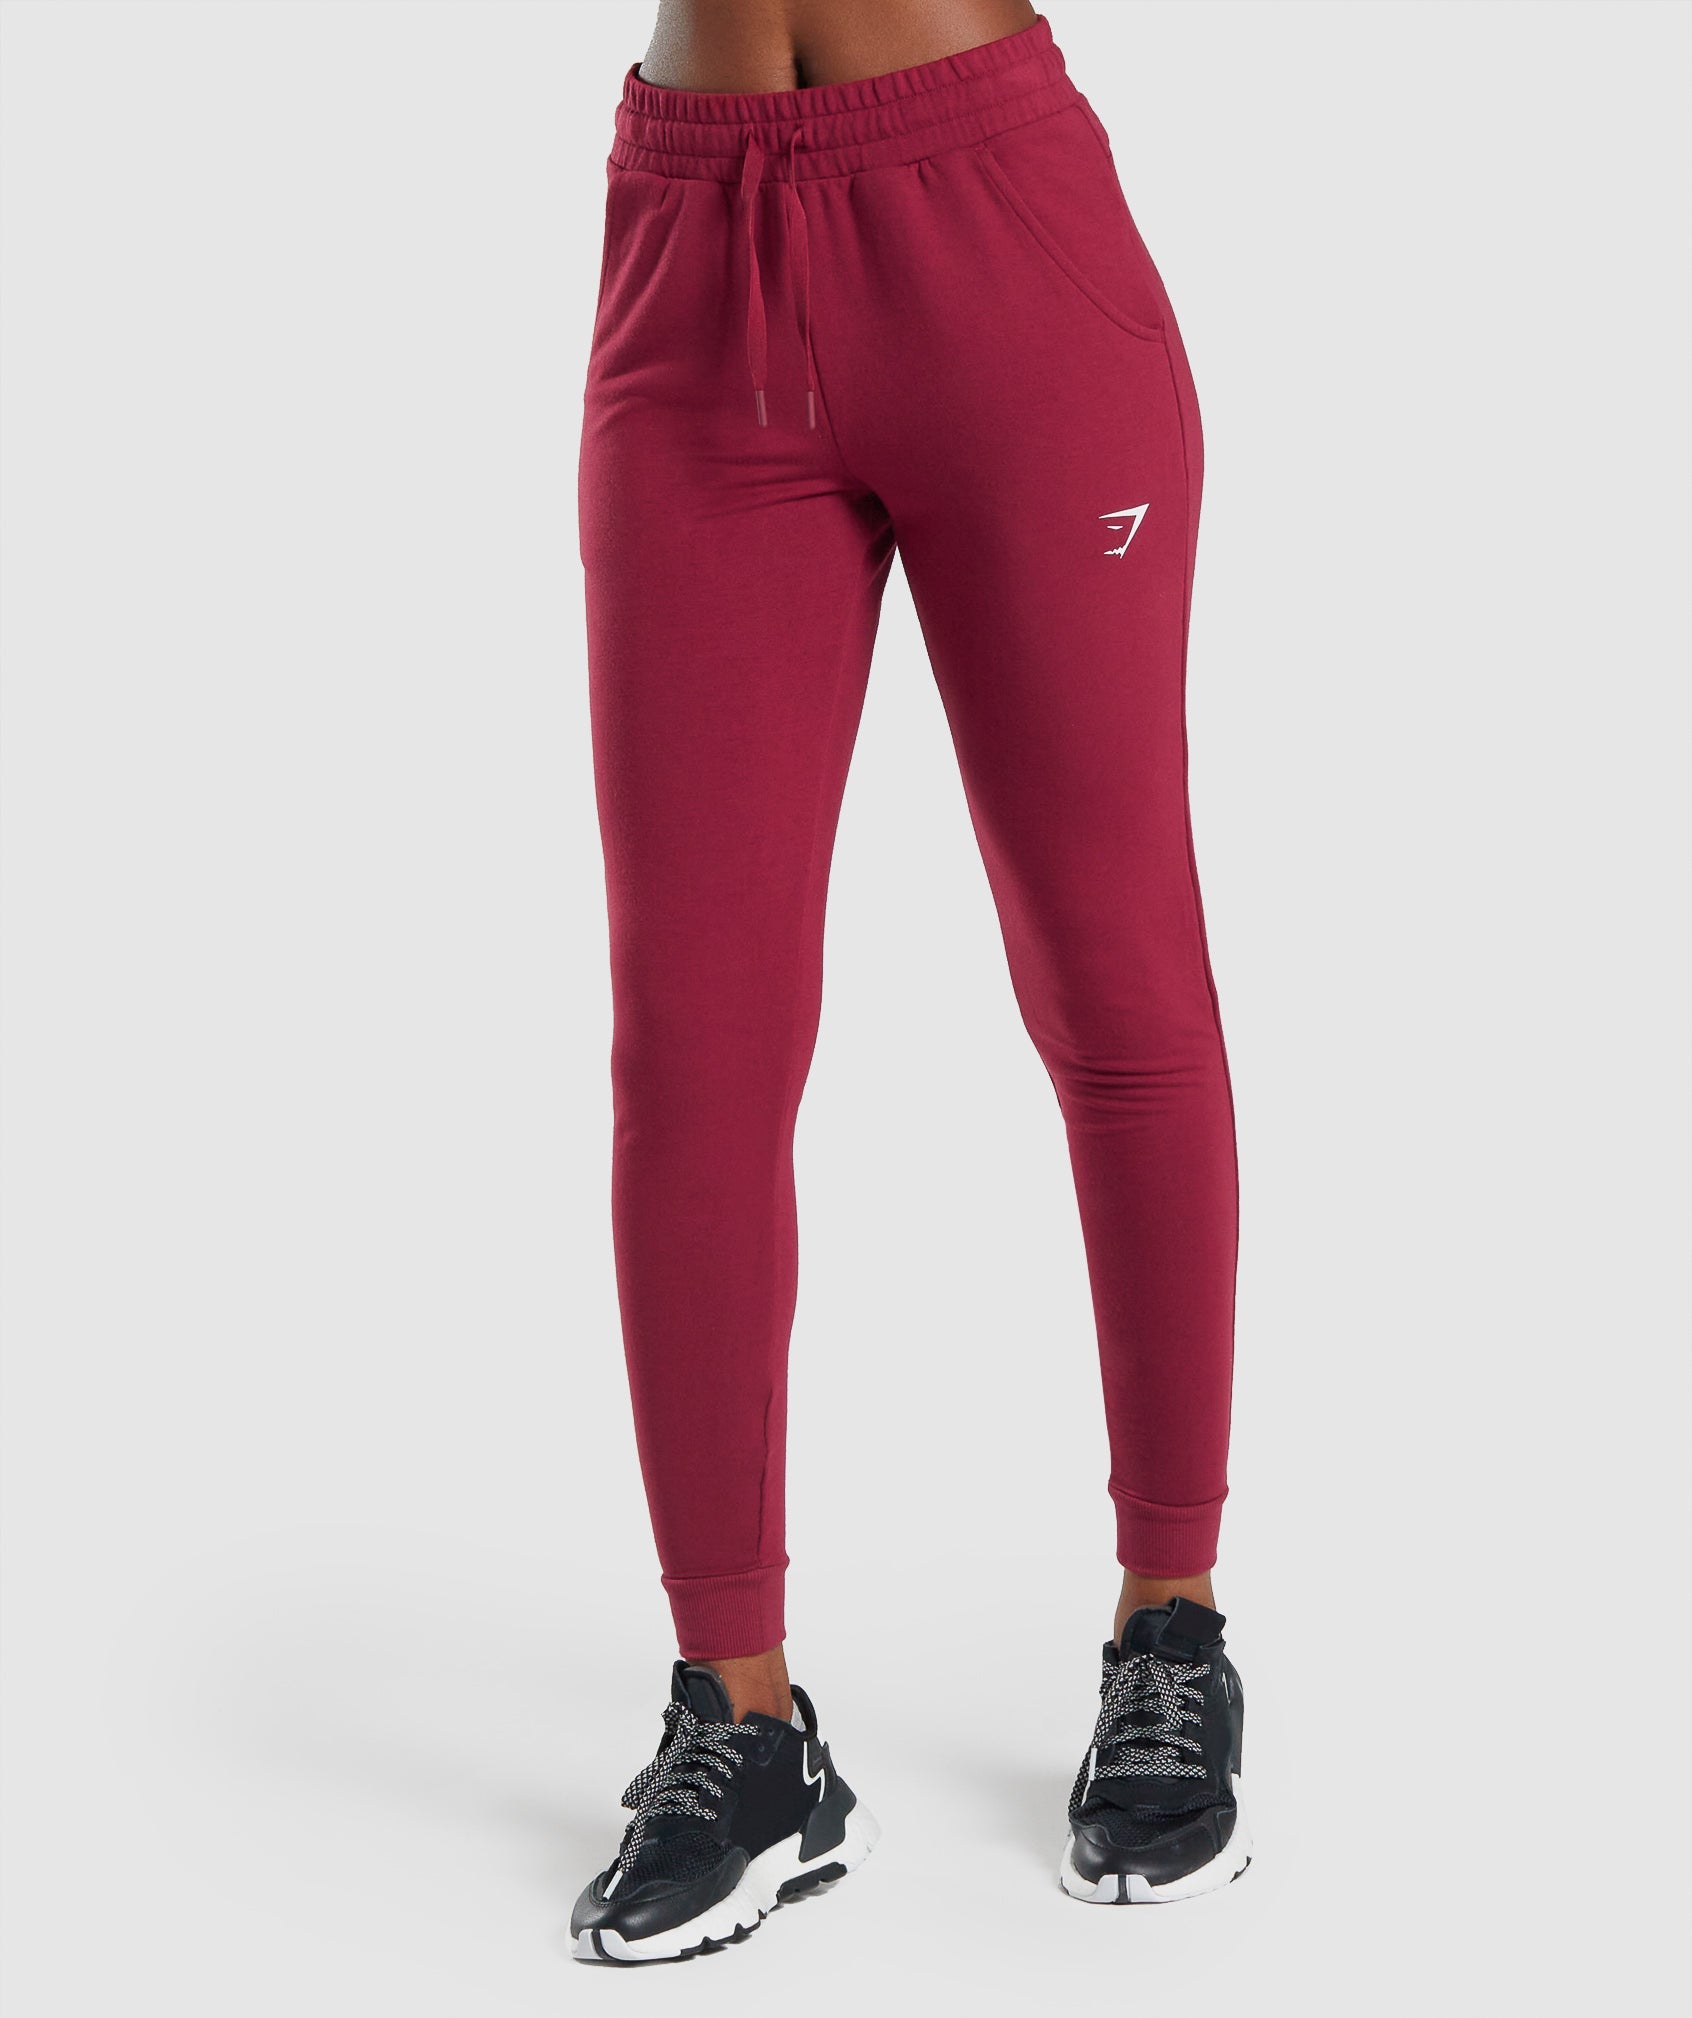 NEW Gymshark Pippa Training Joggers in burgundy. Size Small.